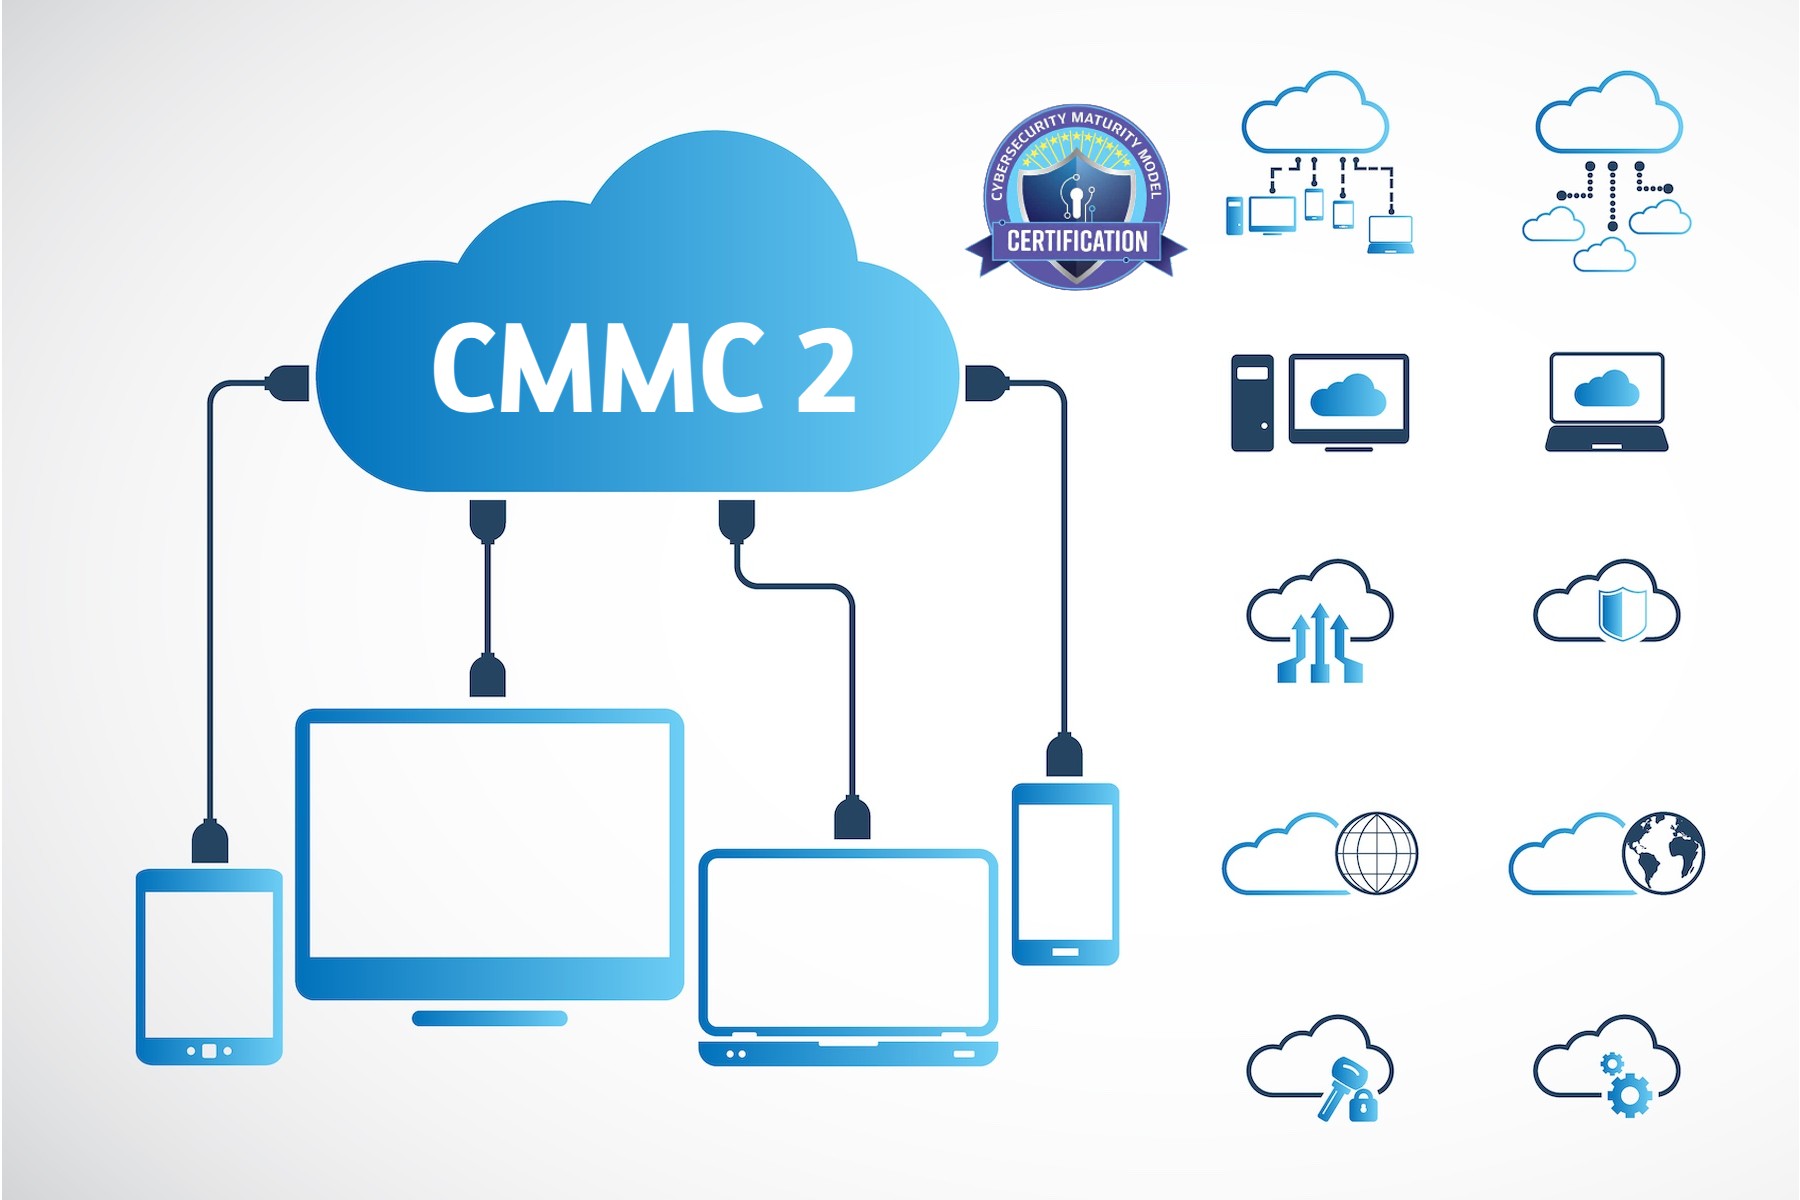 Time is Running Out: Start on your CMMC Certification Now